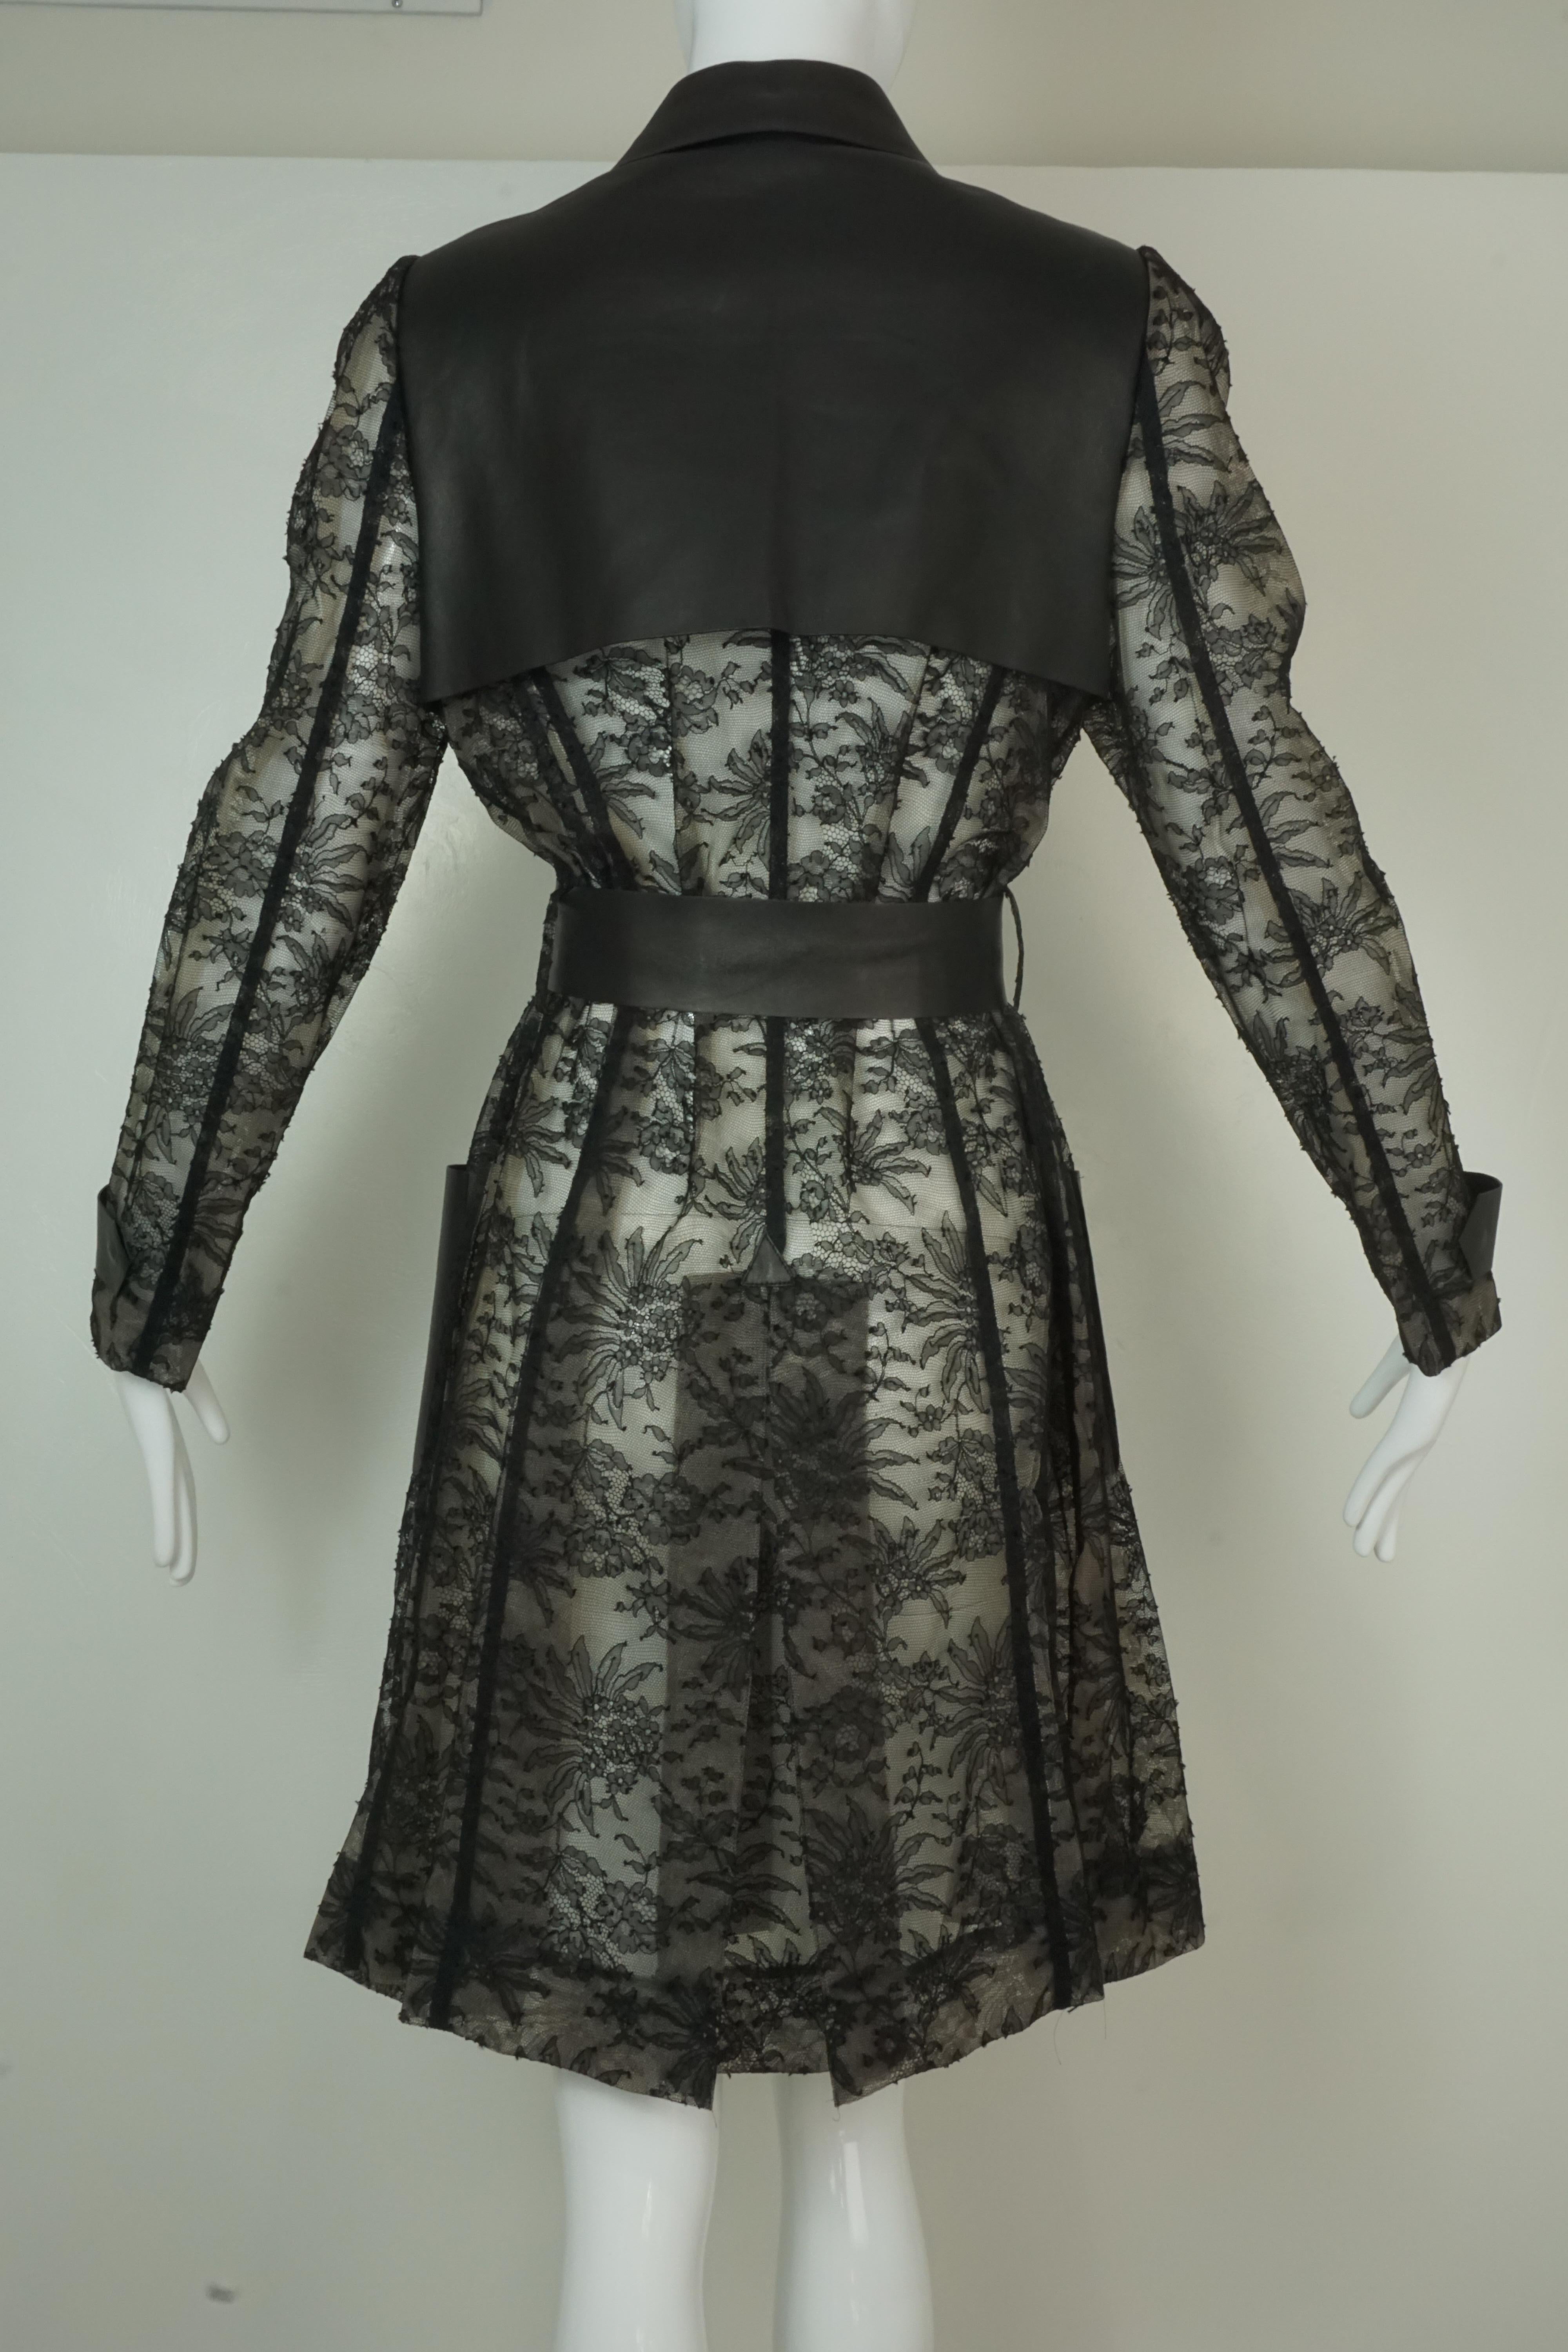 Valentino Black Leather and Lace Trench Coat 2011 7